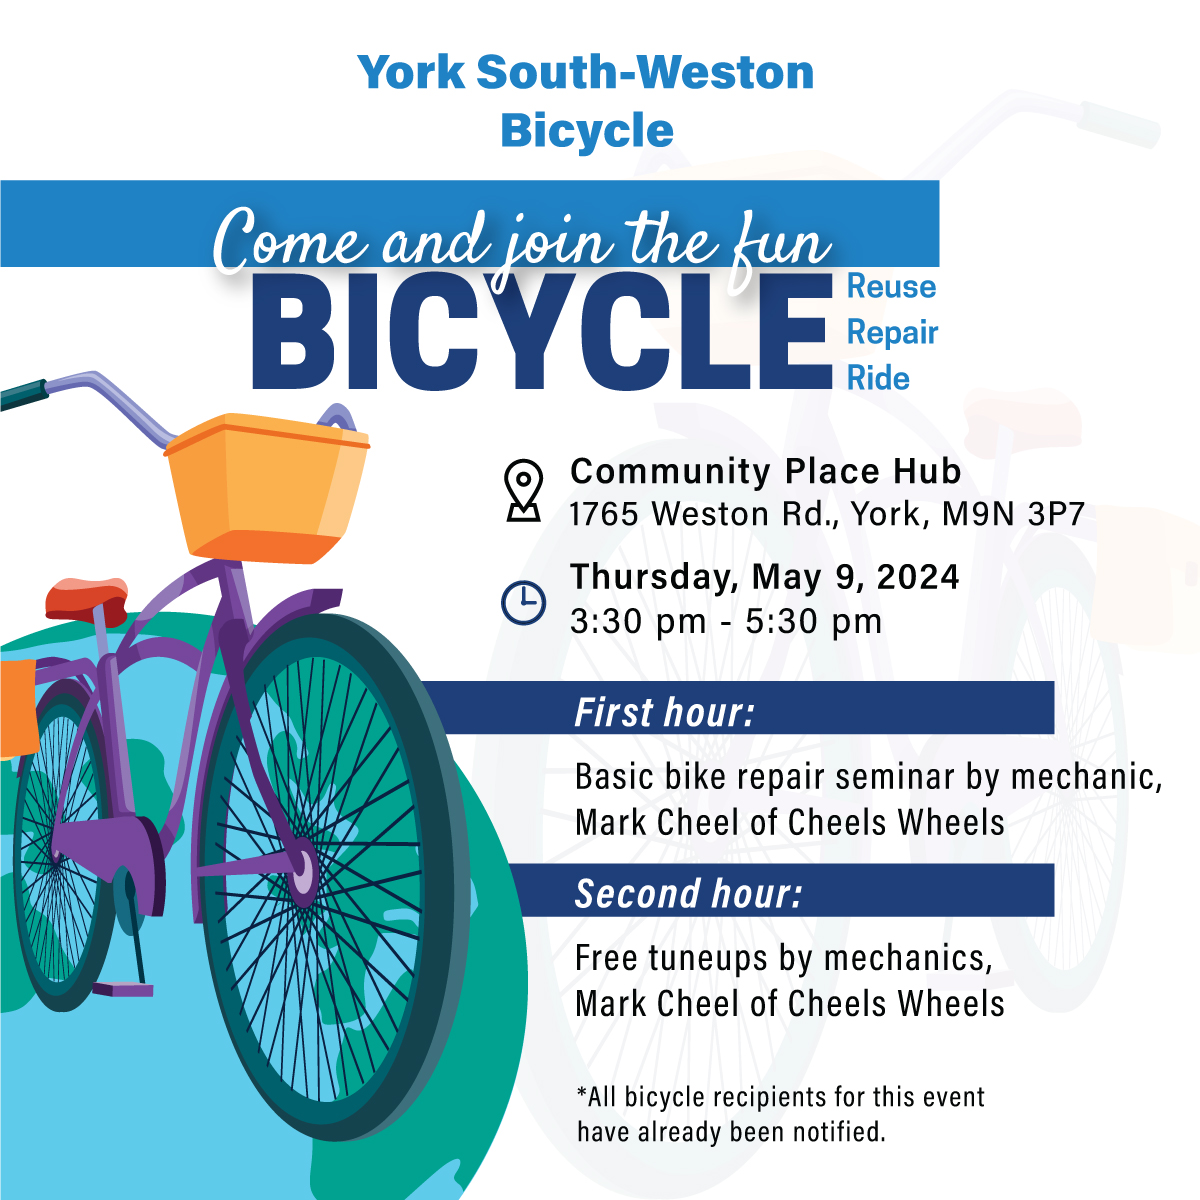 Come and join the fun! 🚵‍♀️ 🗓️Thursday, May 9, 2024 ⏰3:30 pm - 5:30 pm 📍Location: 1765 Weston Road, York, M9N 3P7 For more information: 416-323-1429 #Bicycle #Wellness #Health